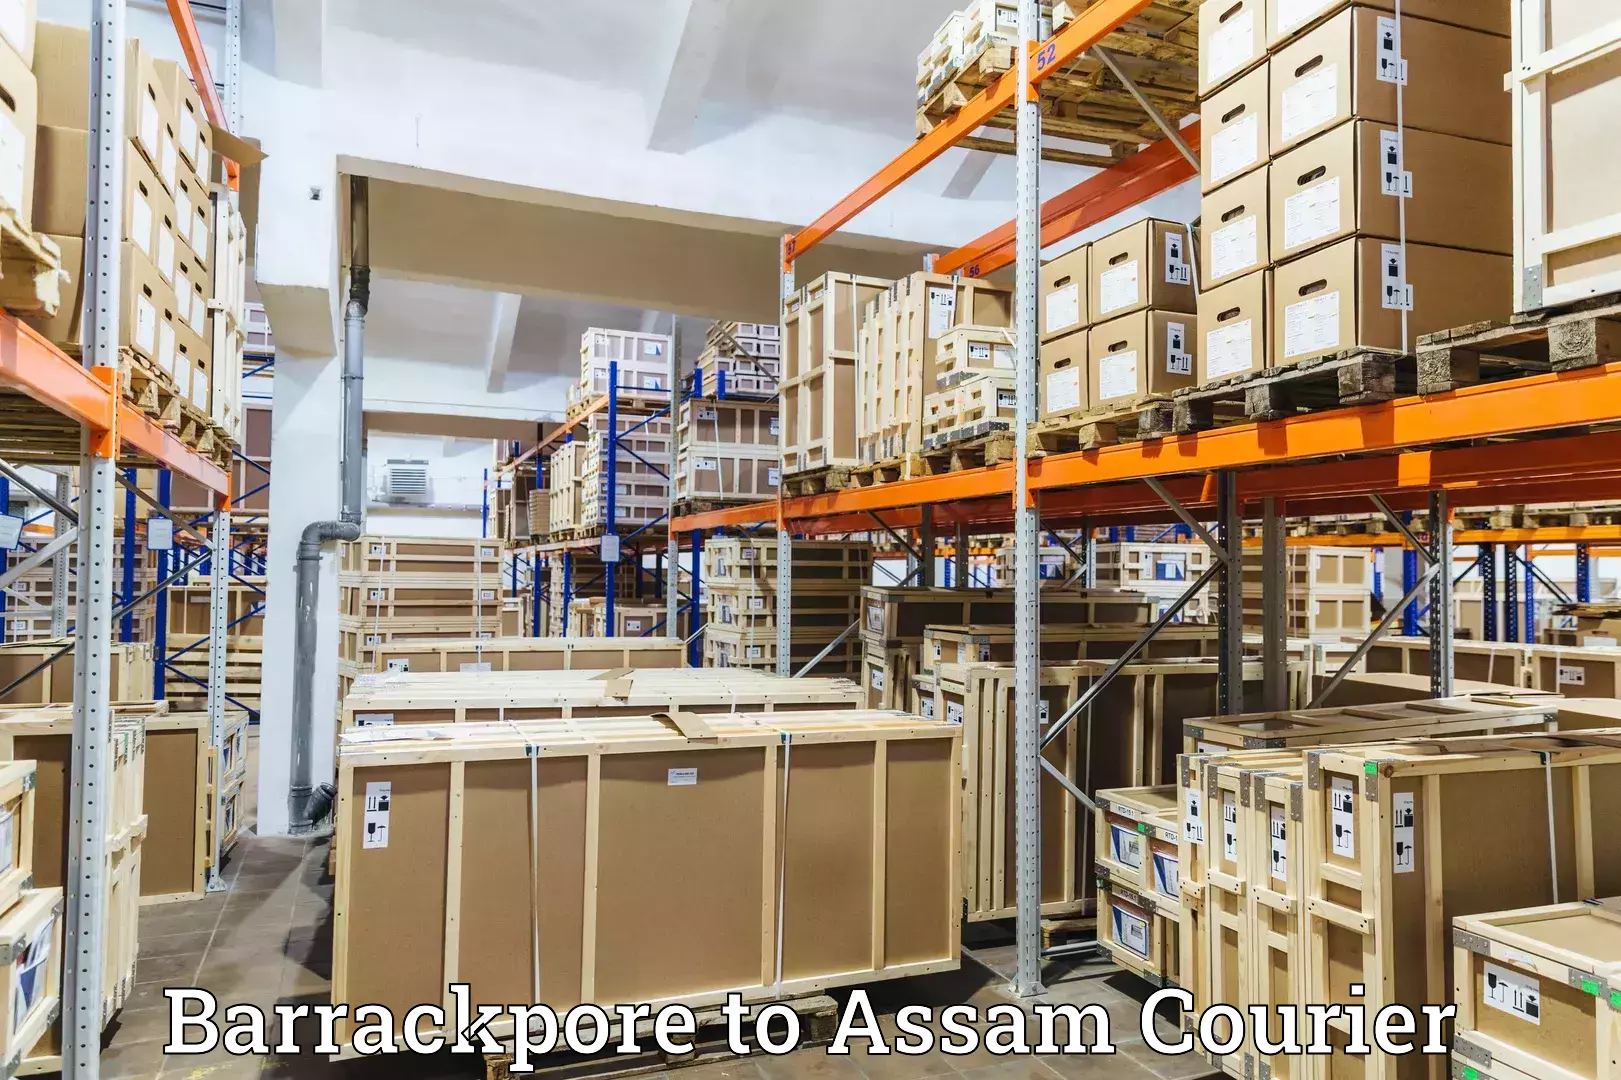 Seamless shipping service in Barrackpore to Kamrup